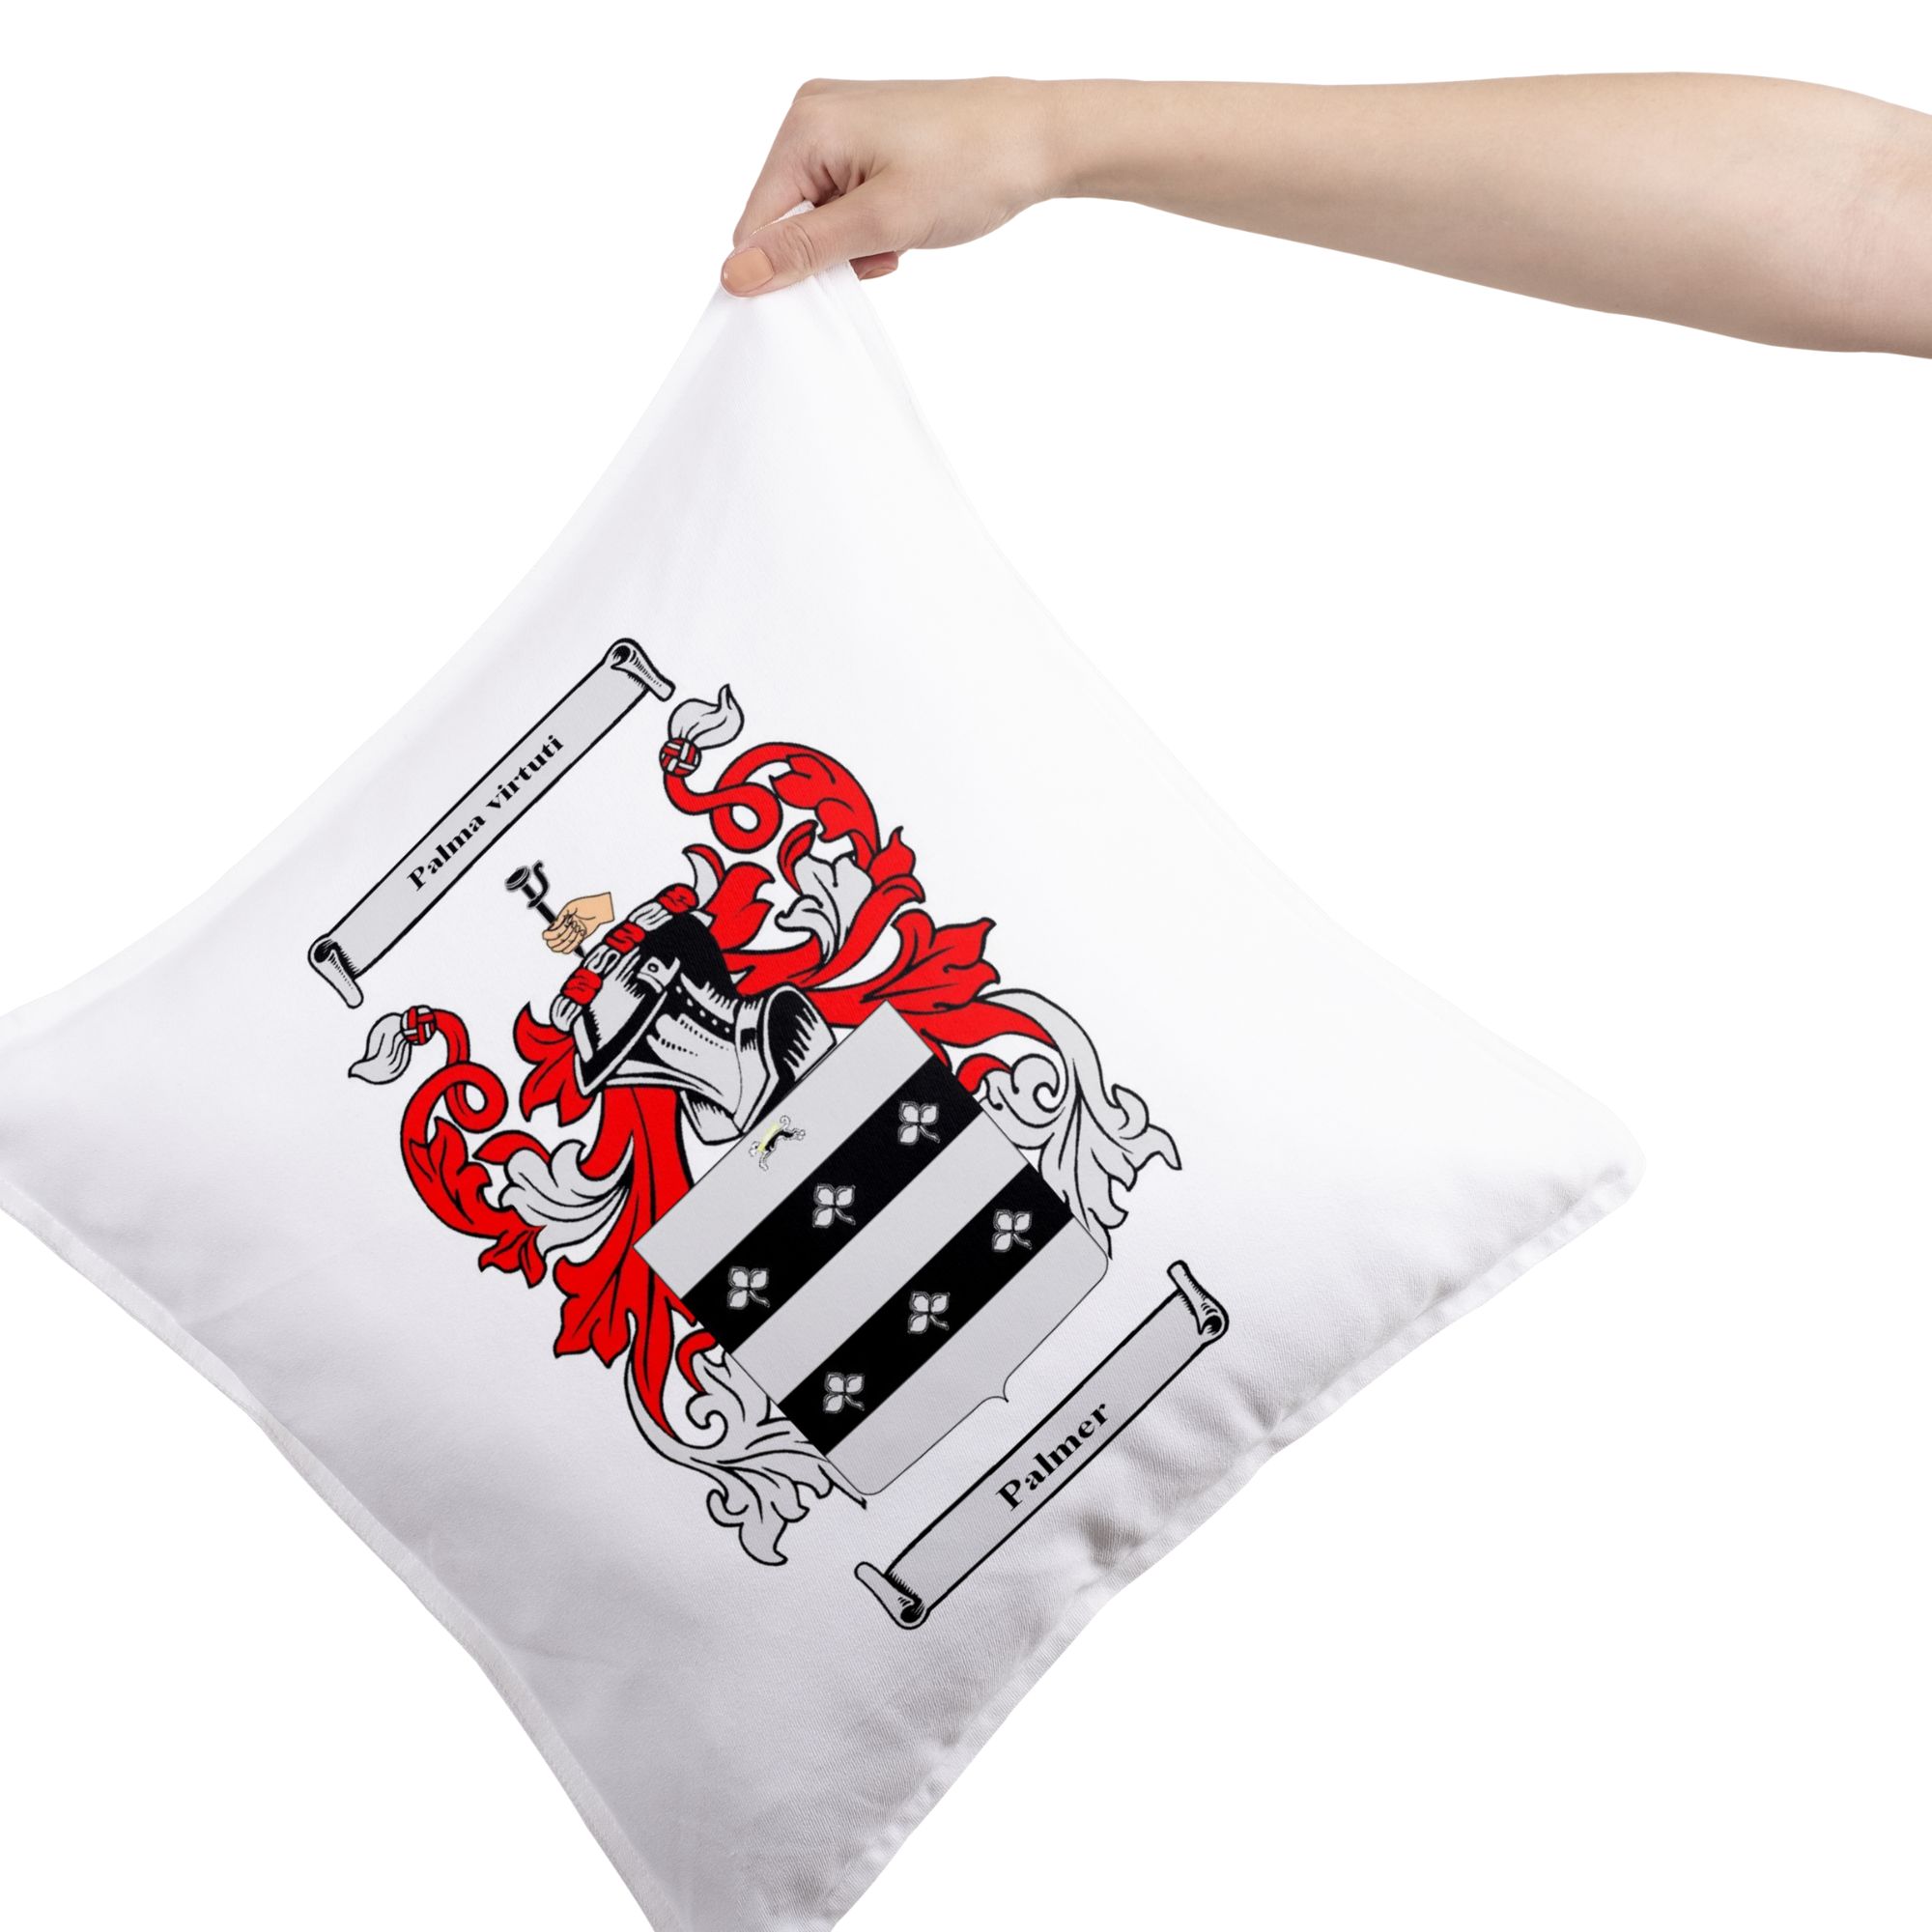 coat-of-arms-cushion-personalised (5)